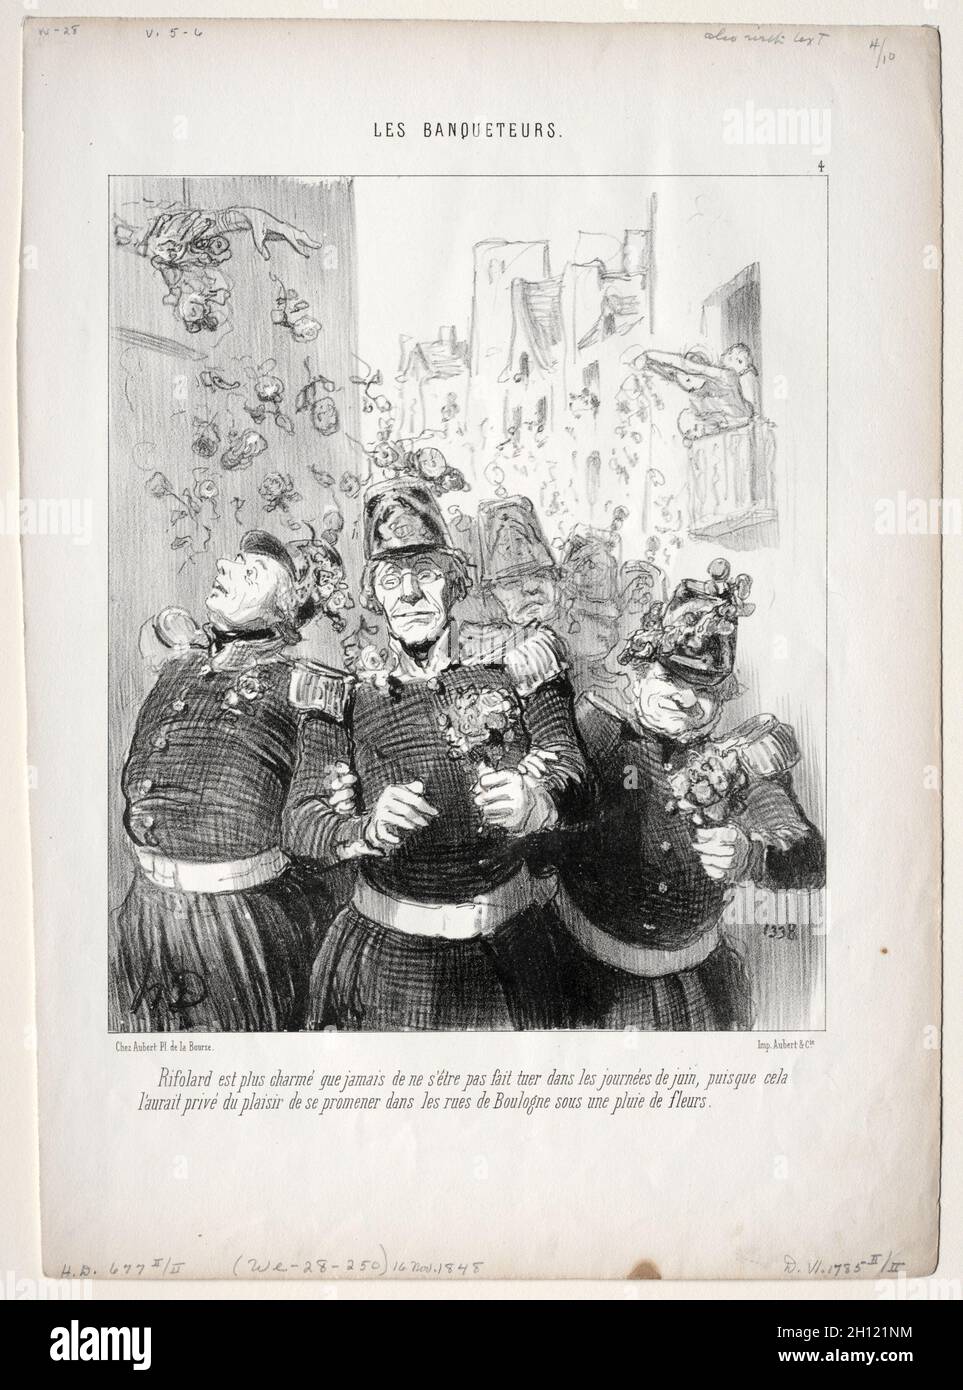 published in le Charivari (11 January 1849): The Banqueters, plate 4: Rifolard is more charming than ever..., 1848. Honoré Daumier (French, 1808-1879). Lithograph; sheet: 35.8 x 25.6 cm (14 1/8 x 10 1/16 in.); image: 24.3 x 20.4 cm (9 9/16 x 8 1/16 in.). Stock Photo